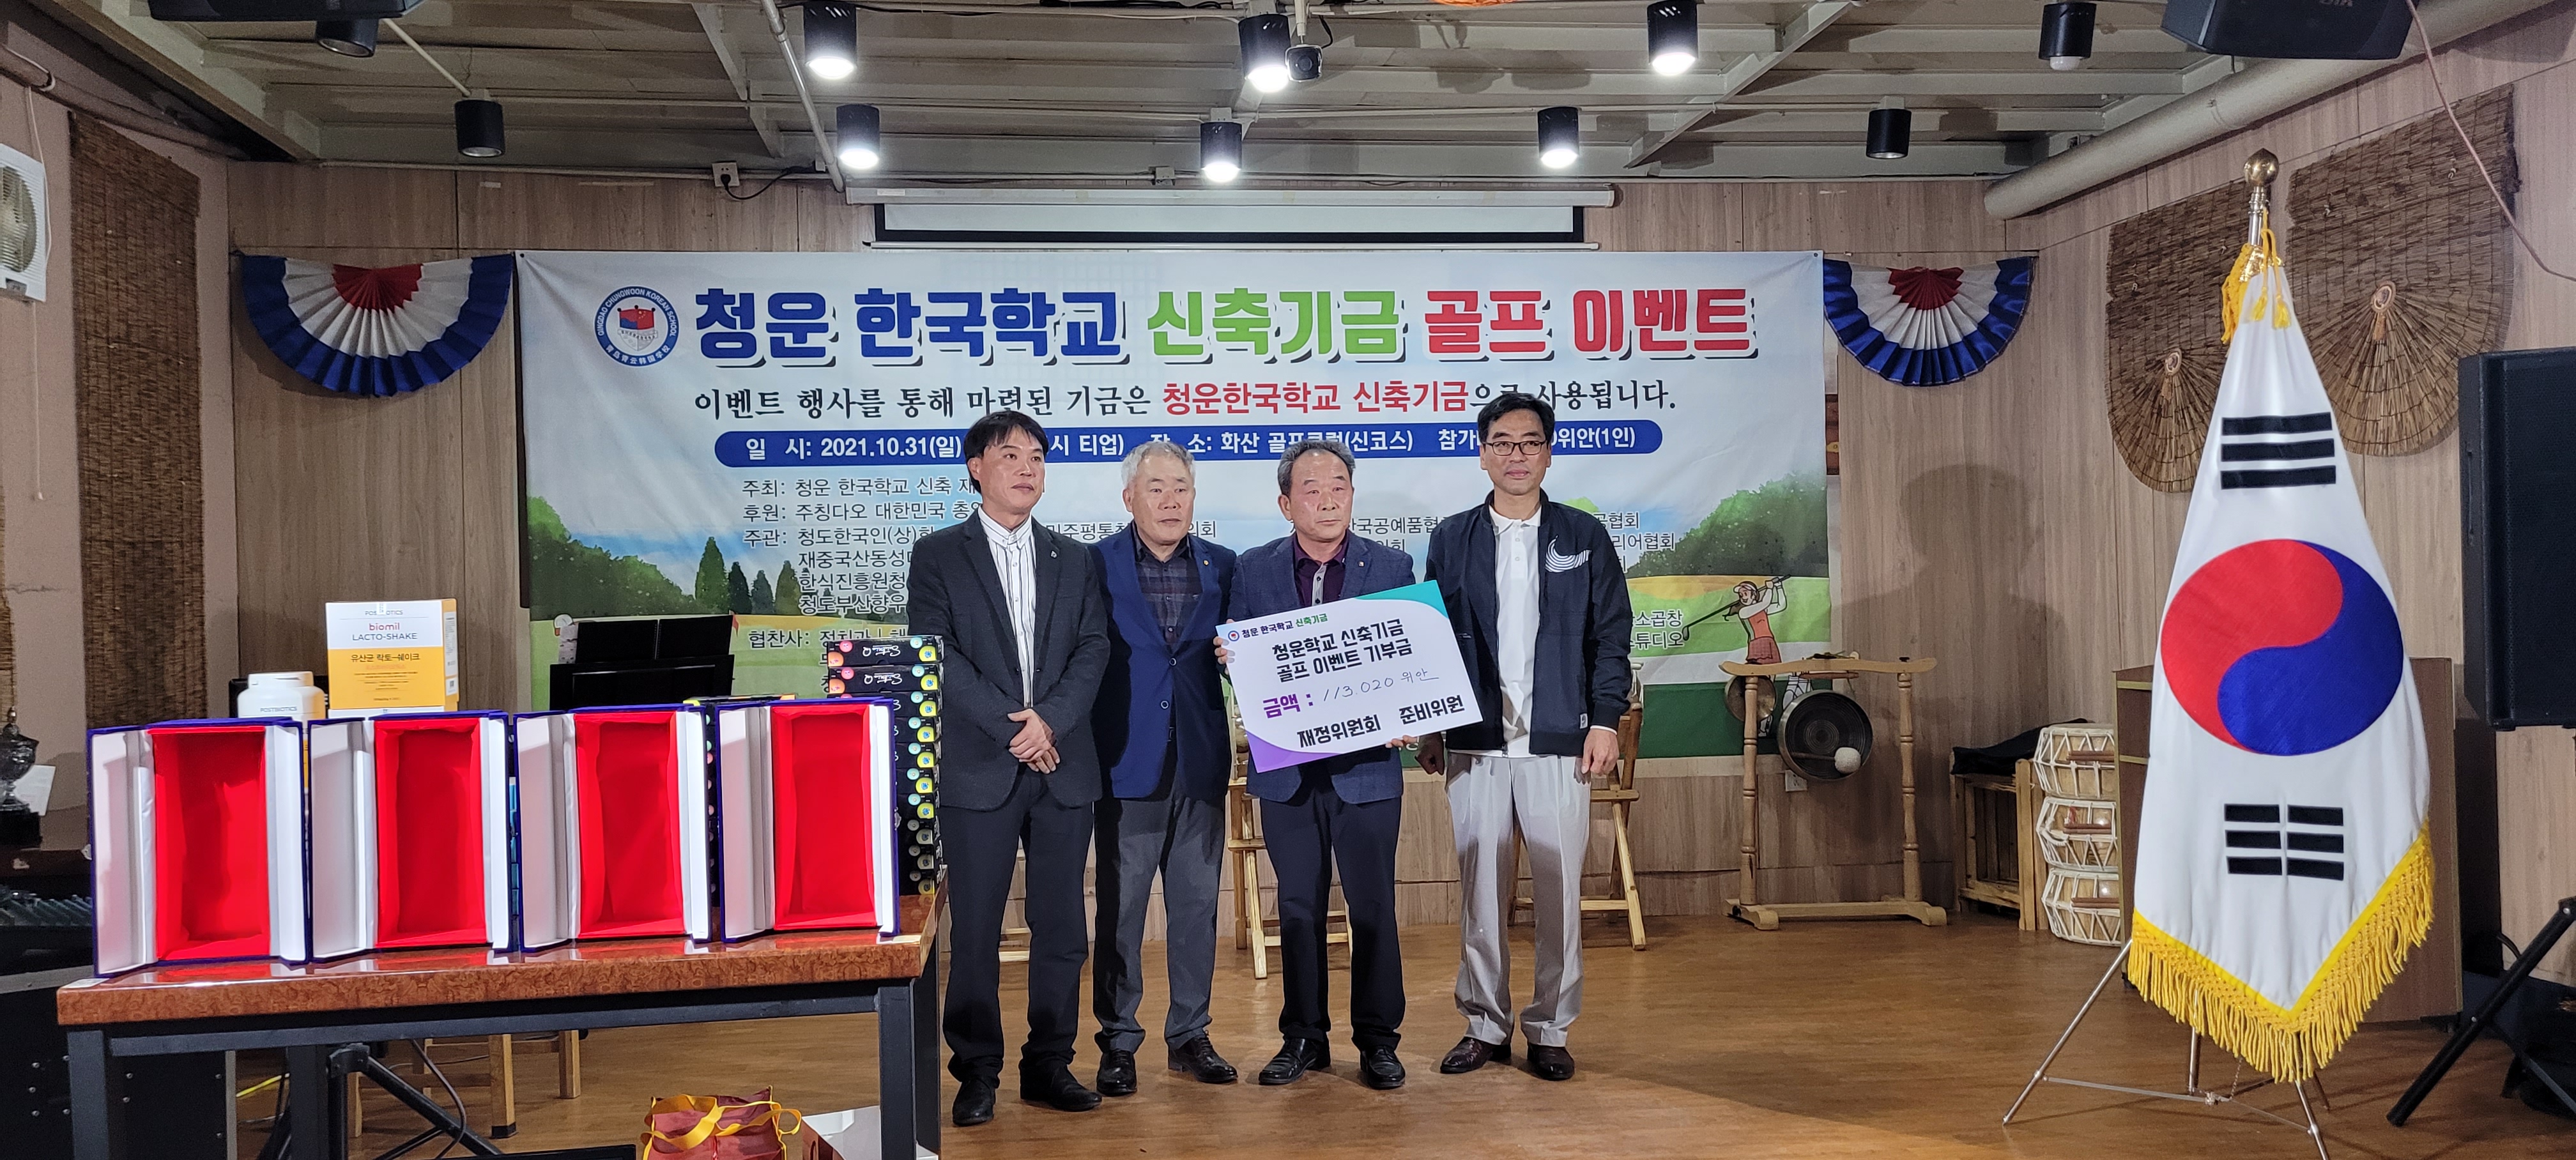 Delivering profit from the golf contest (provided by Chungwoon Korean School)